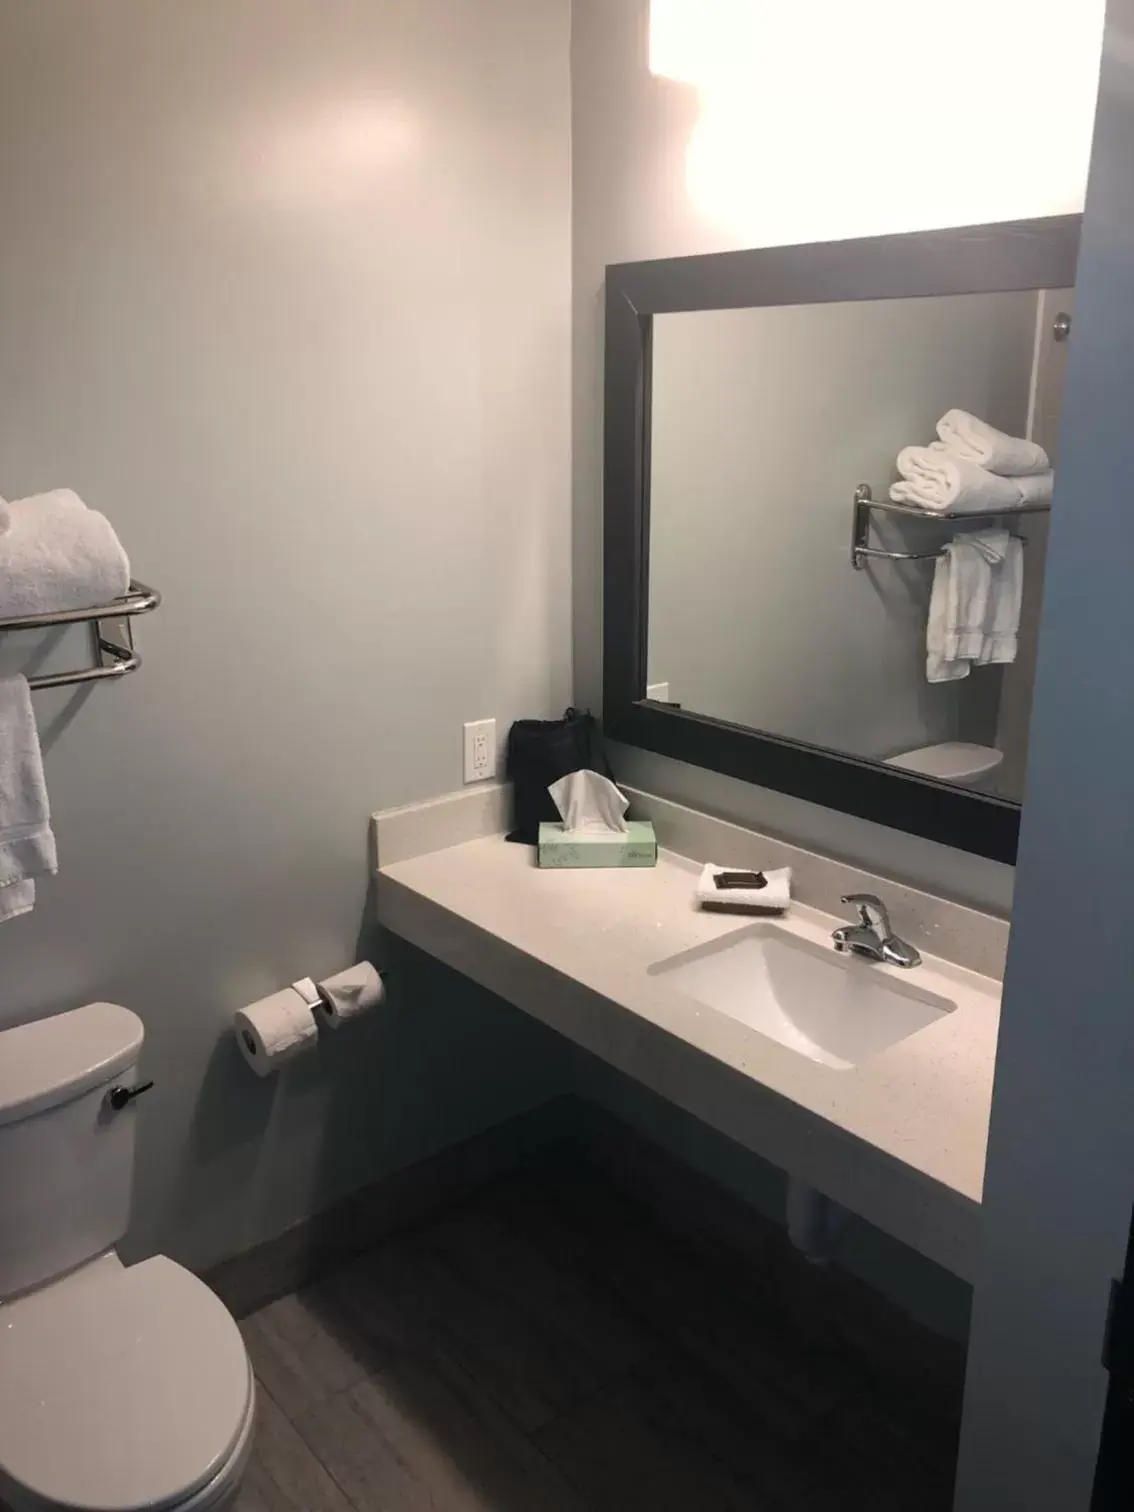 Bathroom in Wingate by Wyndham Humble/Houston Intercontinental Airport